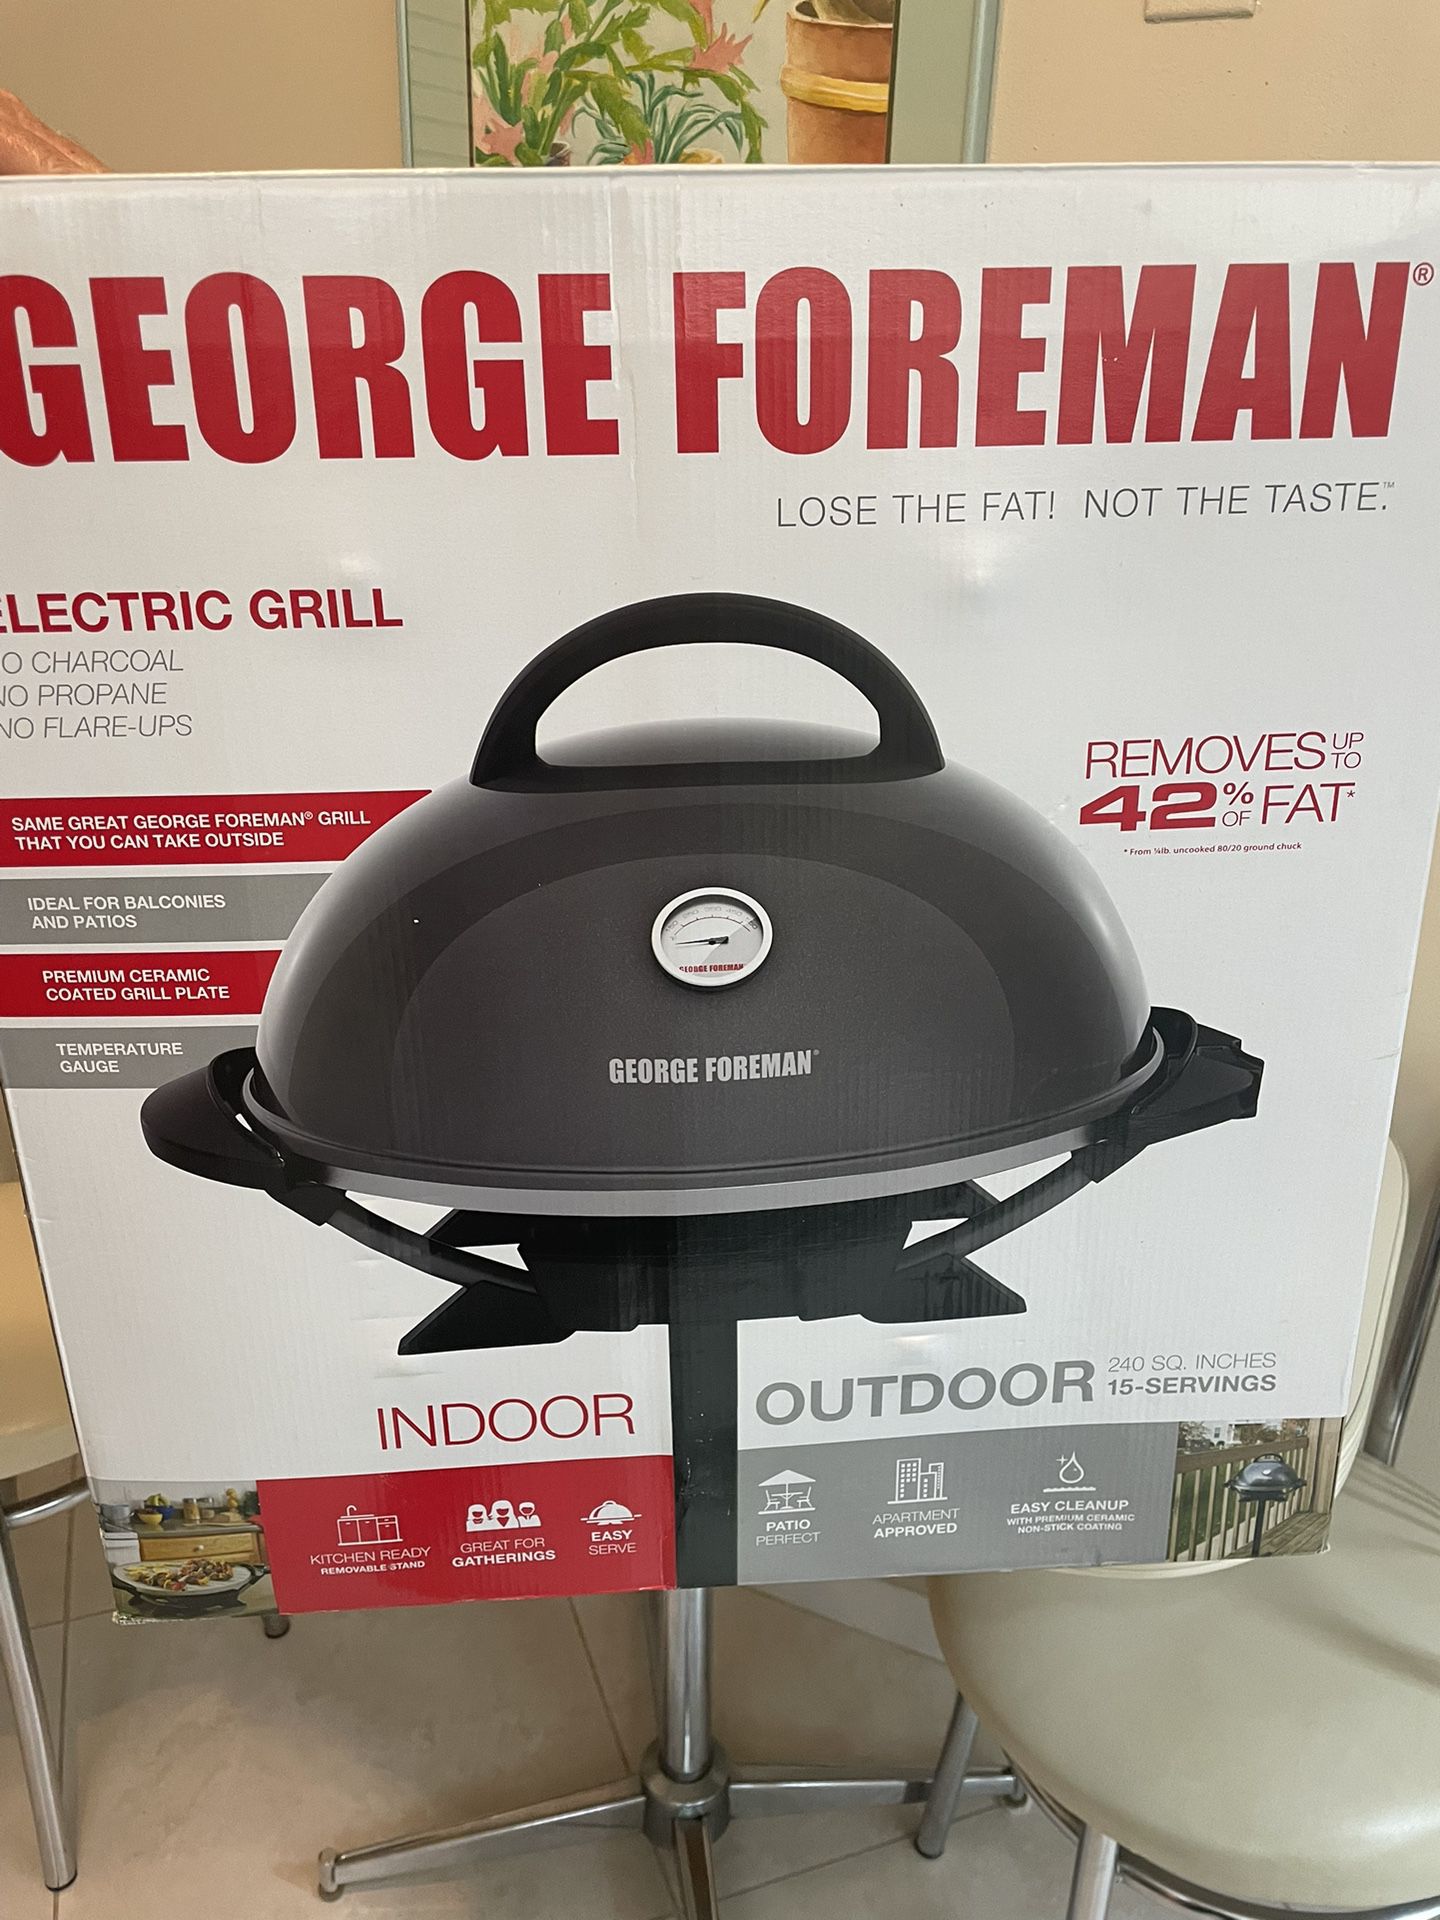 NEW George Forman Electric Grill